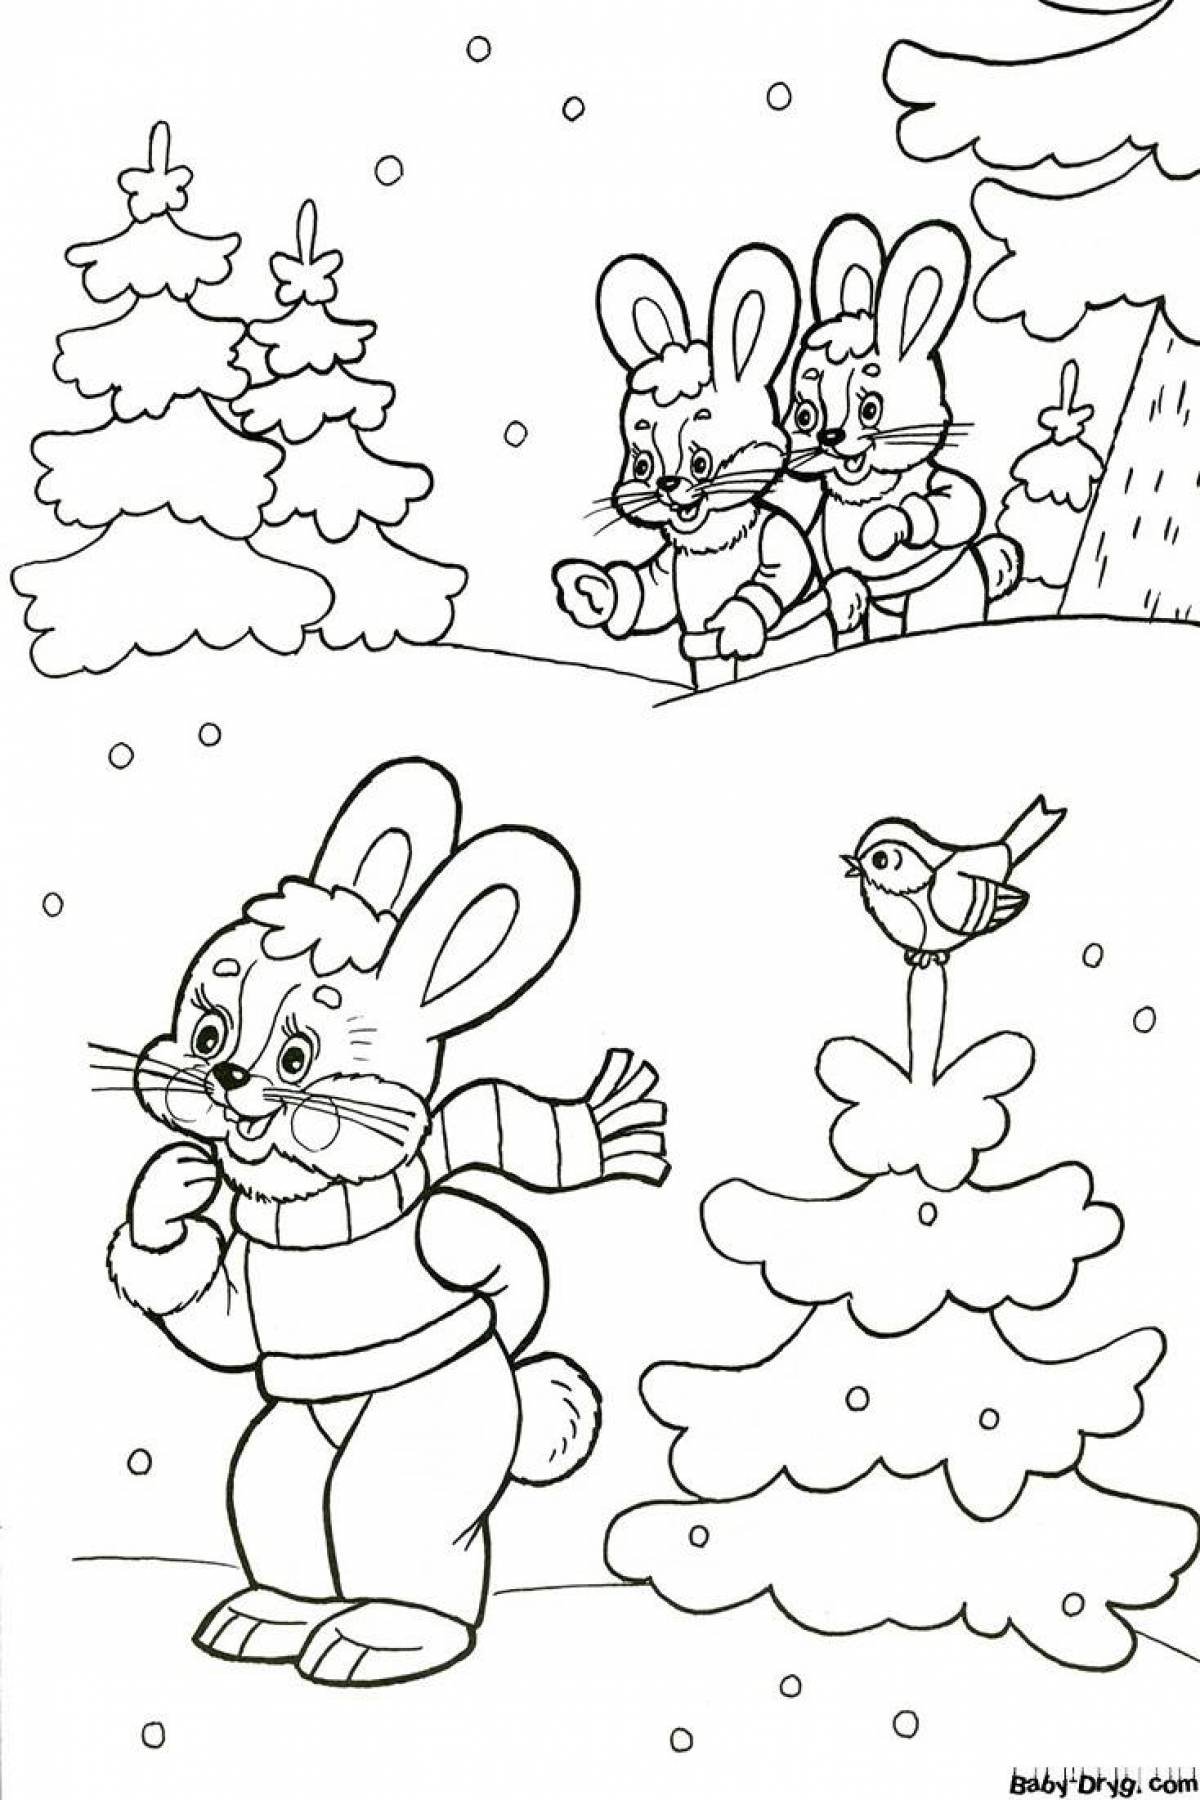 Exciting winter coloring book for children 4-5 years old